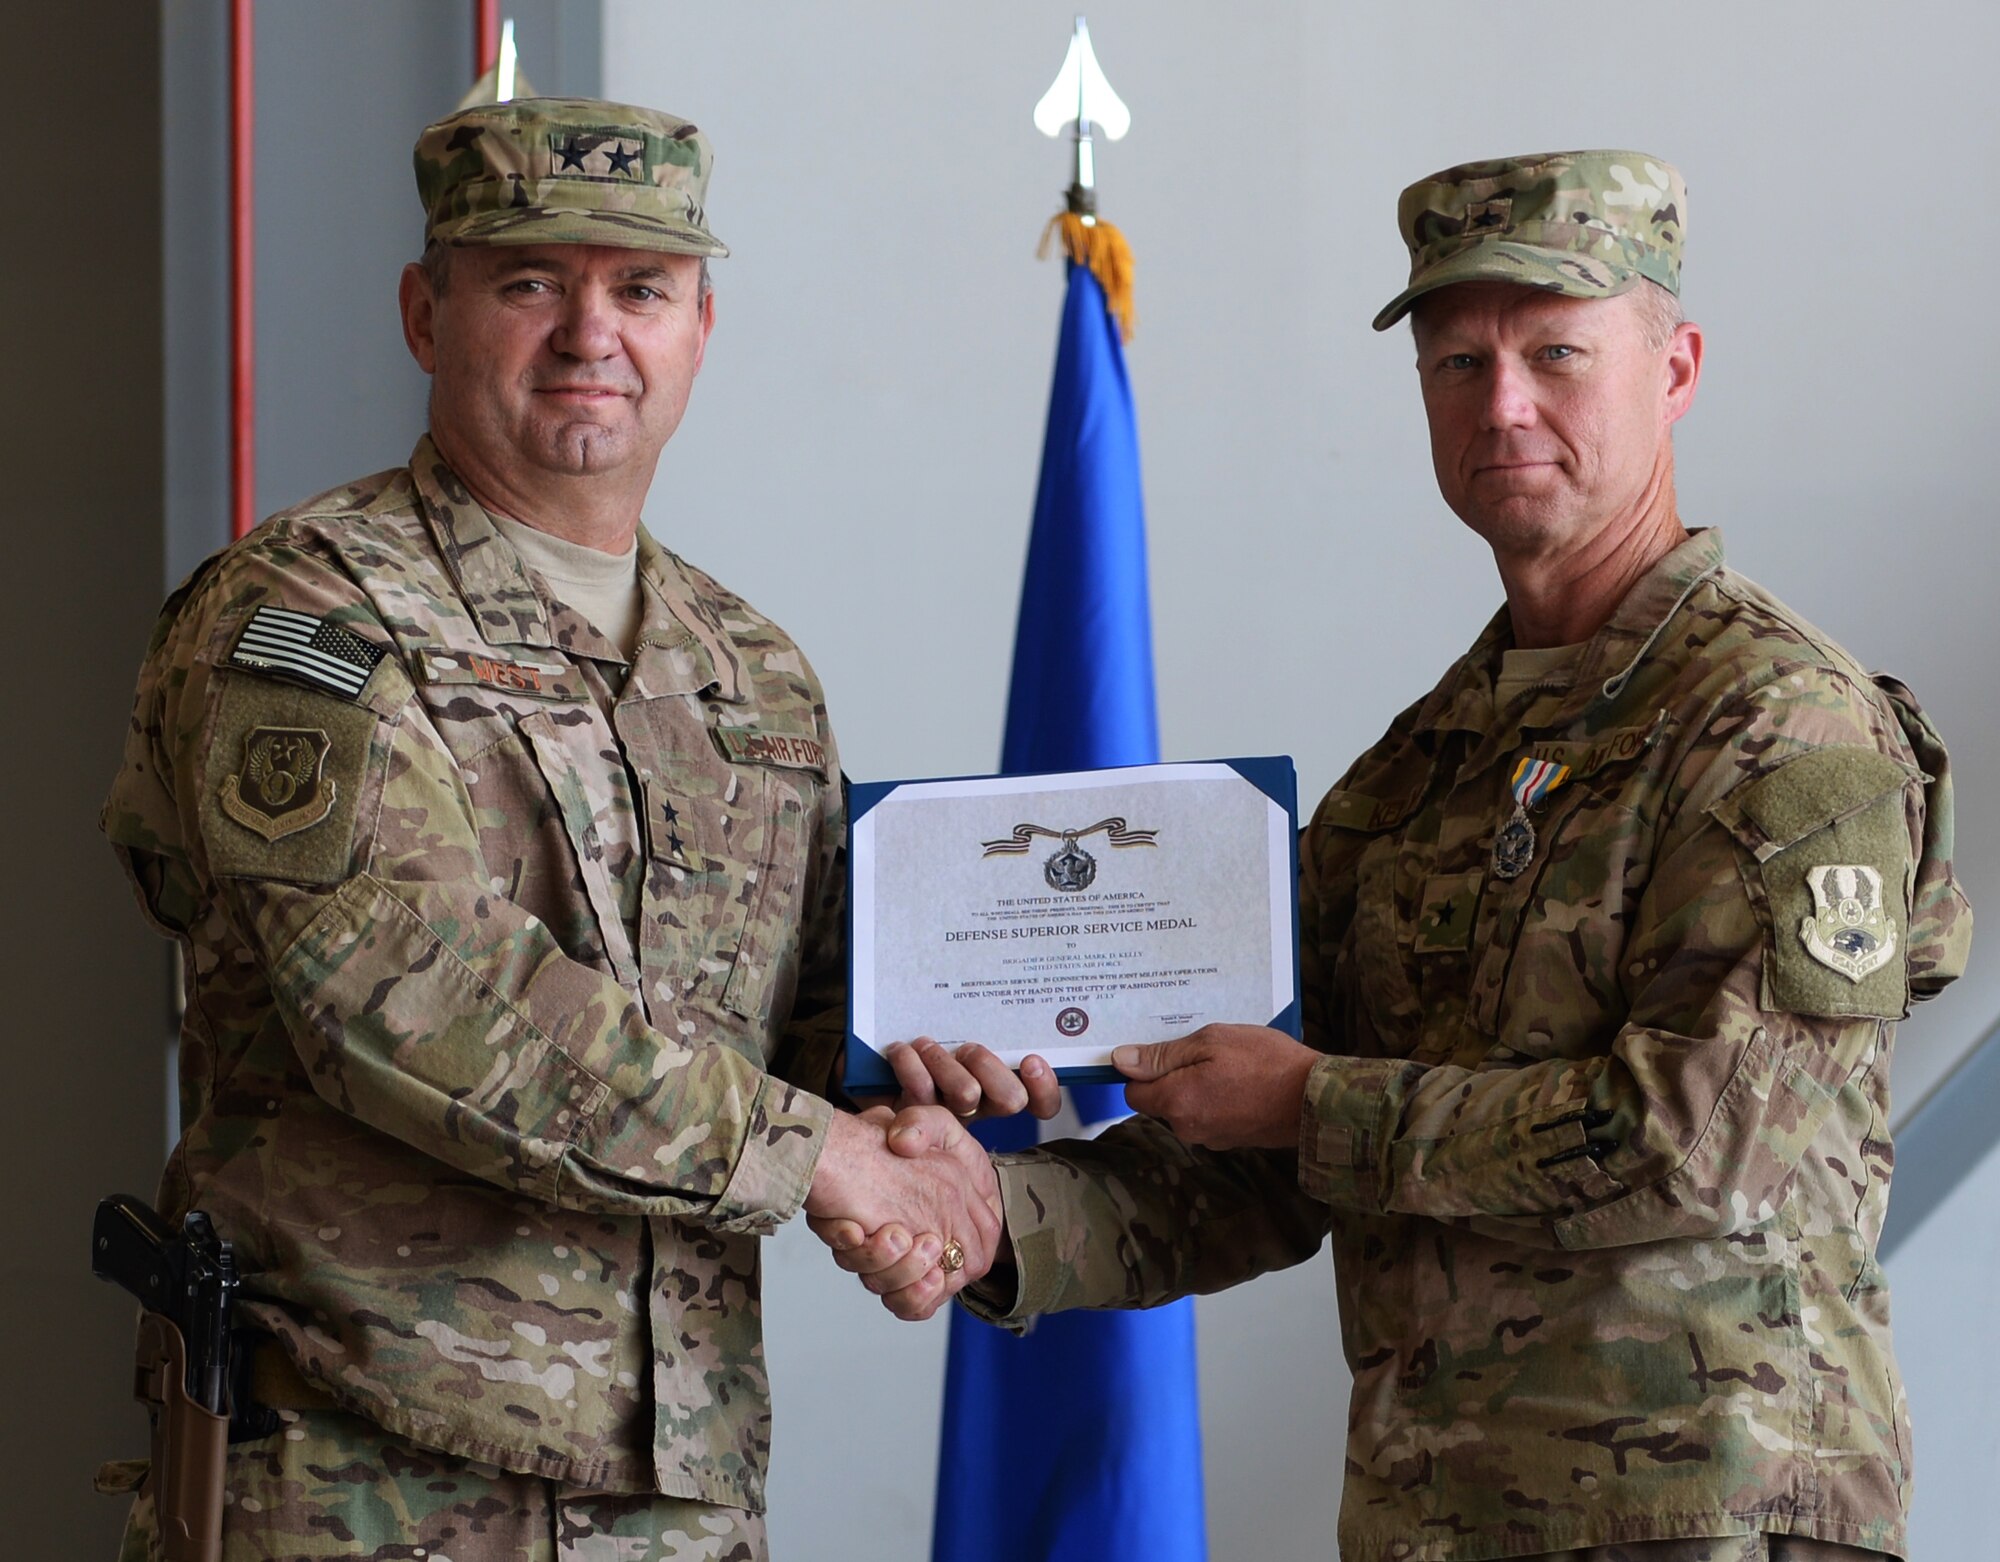 U.S. Air Force Maj. Gen. Scott West, 9th Air and Space Expeditionary Task Force-Afghanistan commander, poses for a photo with Brig. Gen. Mark Kelly, 455th Air Expeditionary Wing commander, after receiving an end of tour decoration July 1, 2015, at Bagram Airfield, Afghanistan. Kelly relinquished command to Brig. Gen. Dave Julazadeh. (U.S. Air Force photo by Senior Airman Cierra Presentado/Released)